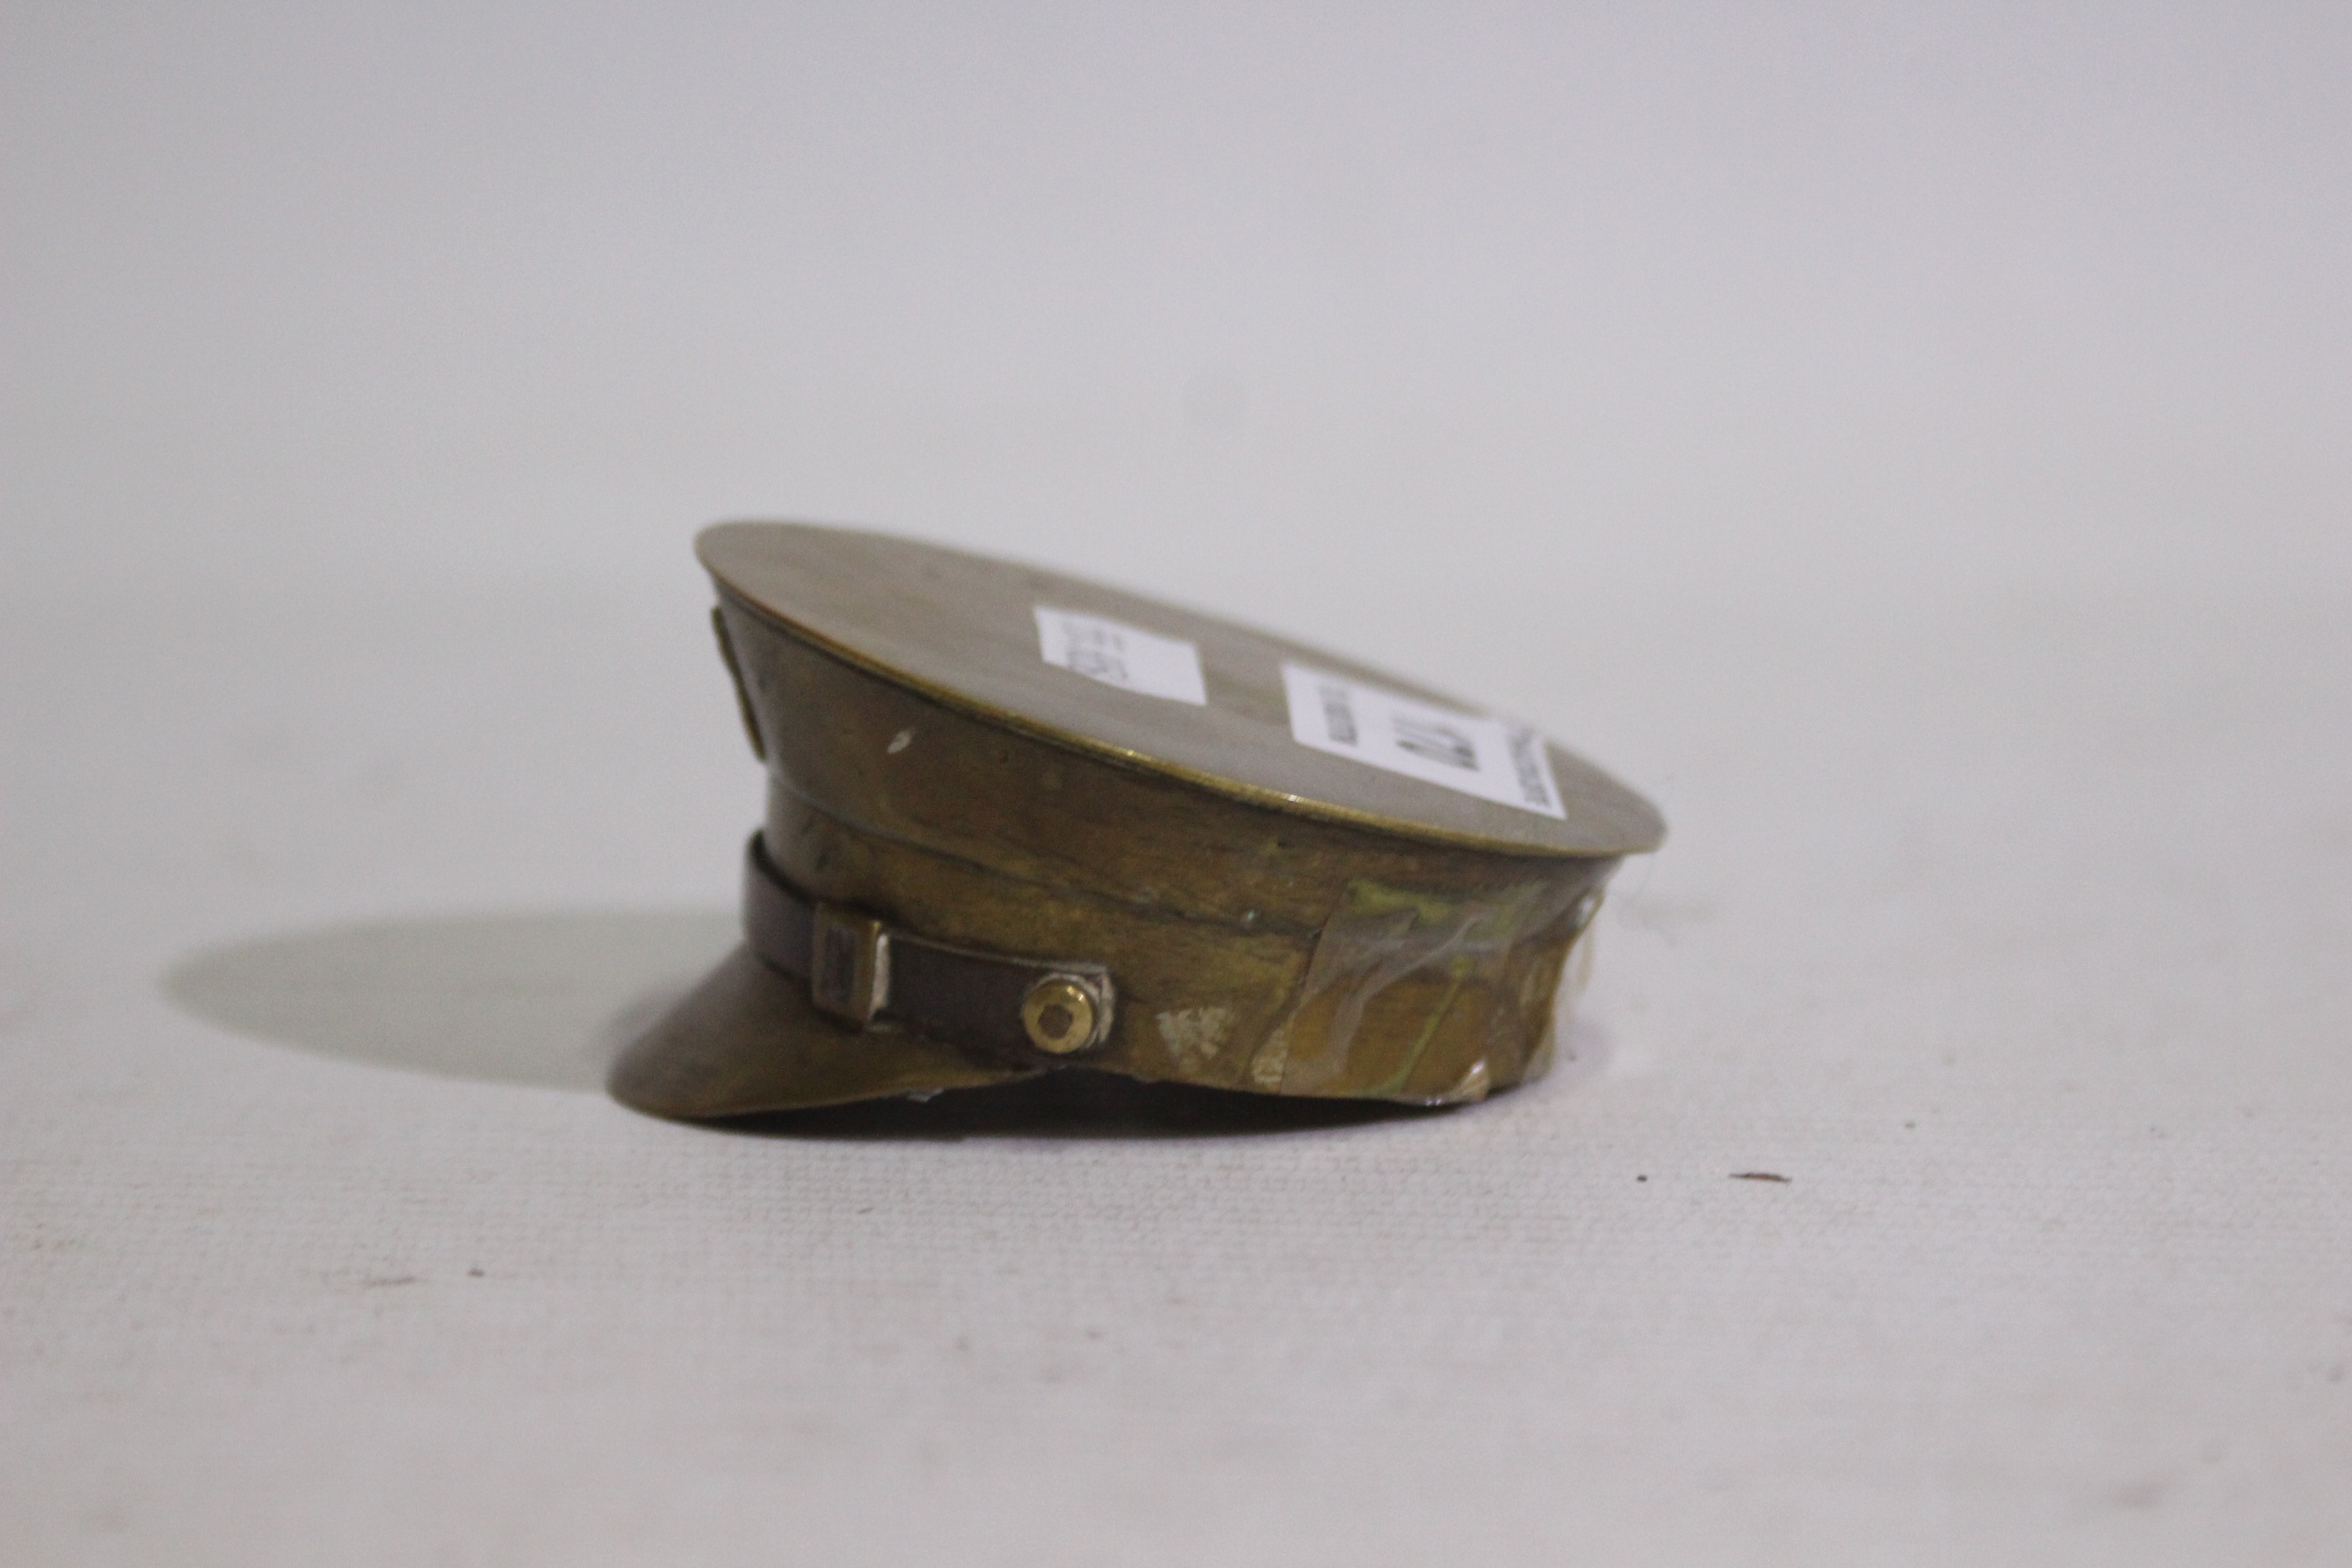 Military Hat Snuff Box - A brass officer's hat military snuff box. - Image 2 of 4